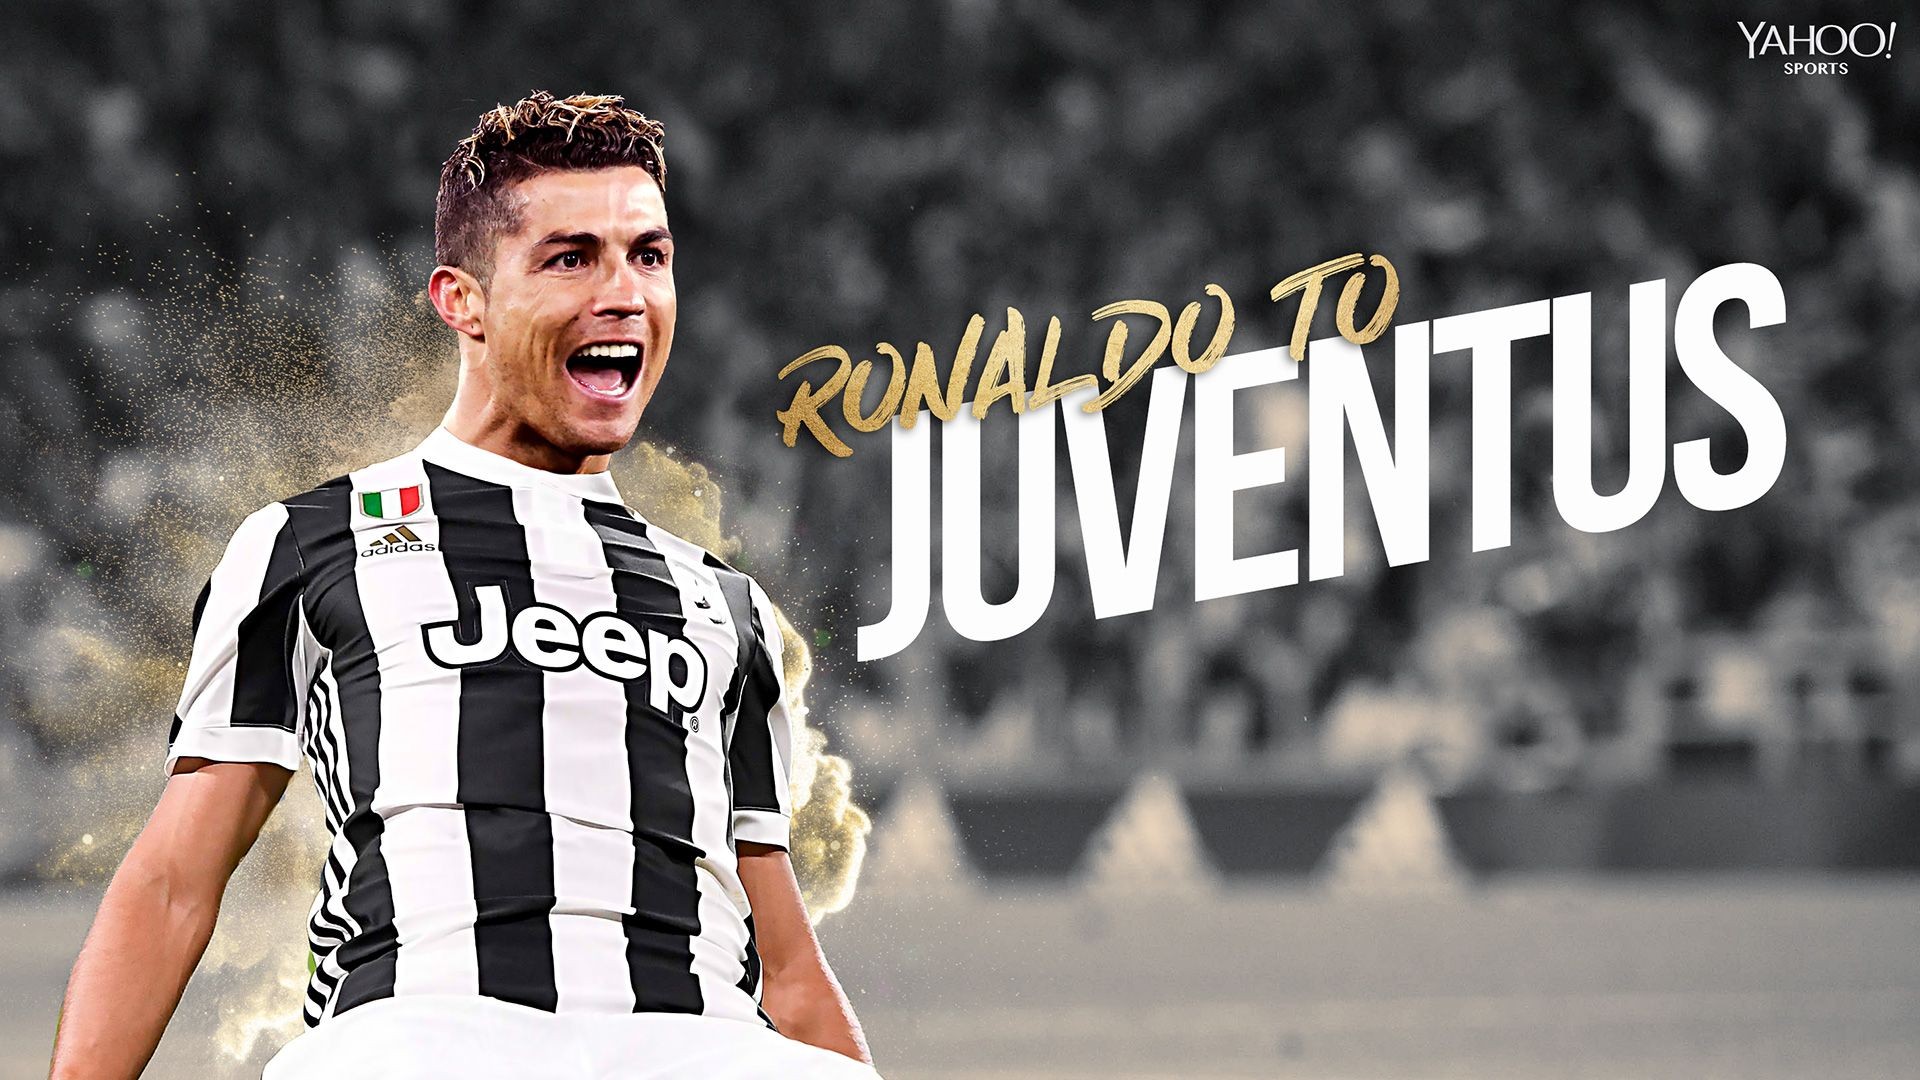 Wallpaper CR7 Juventus with resolution 1920X1080 pixel. You can use this wallpaper as background for your desktop Computer Screensavers, Android or iPhone smartphones